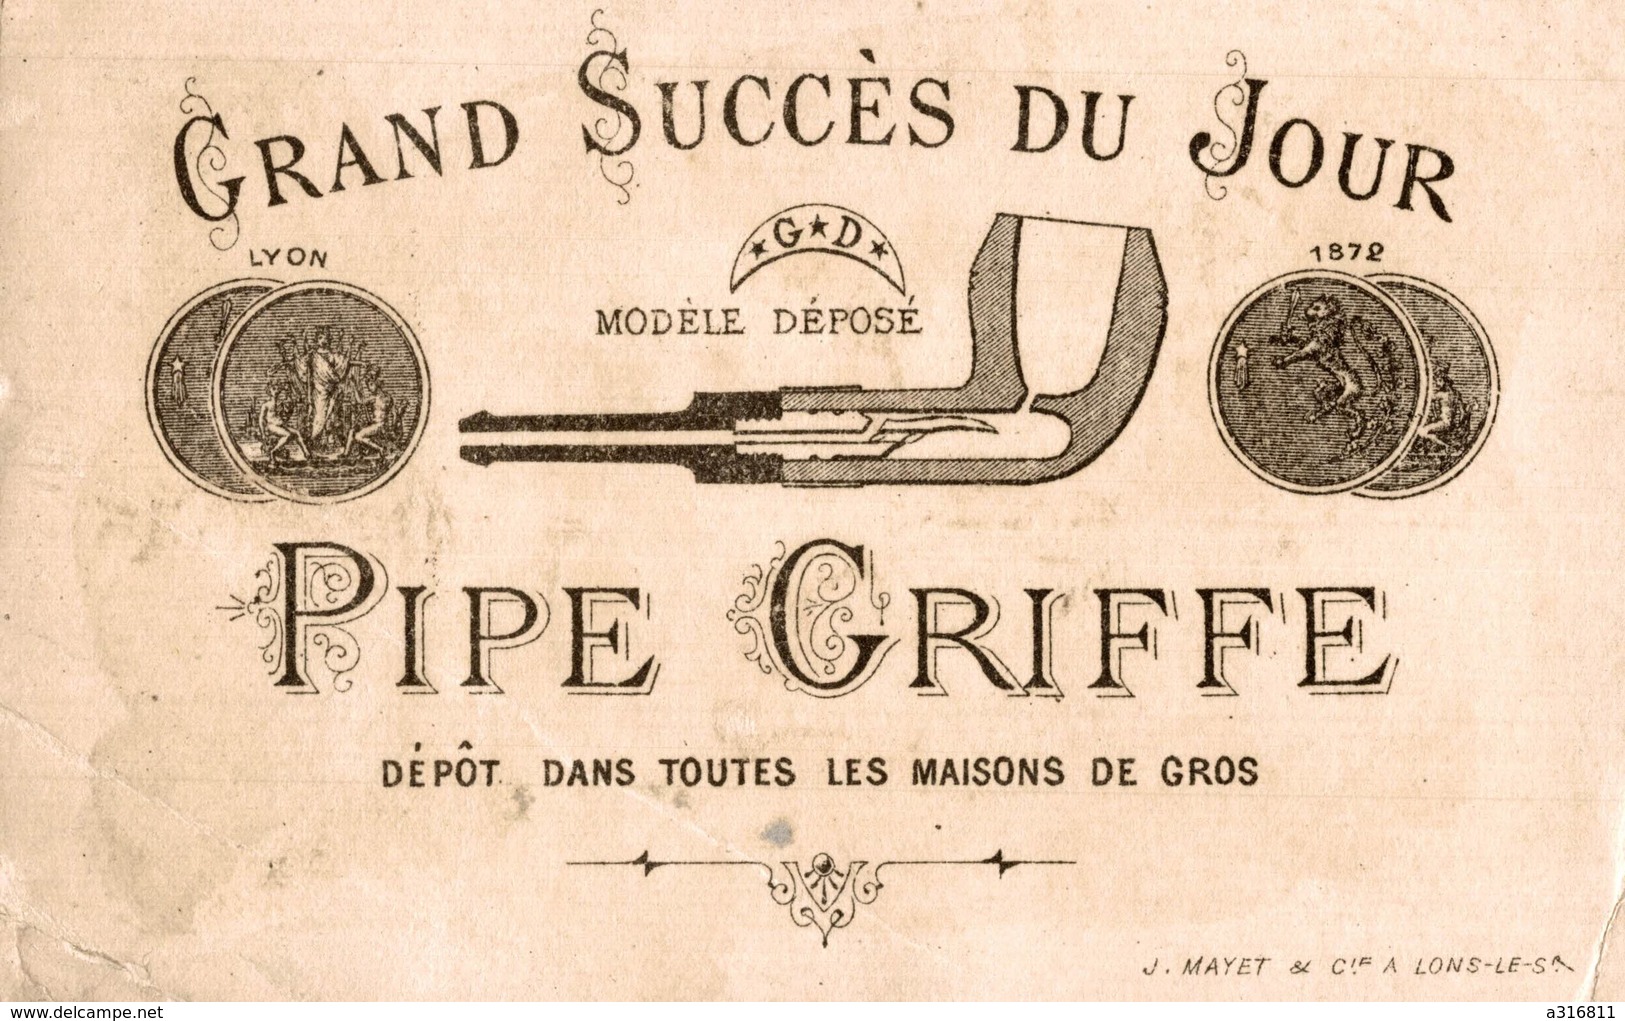 Chromo   GRAND SUCCES DU JOUR PIPE GRIFFE - Ibled